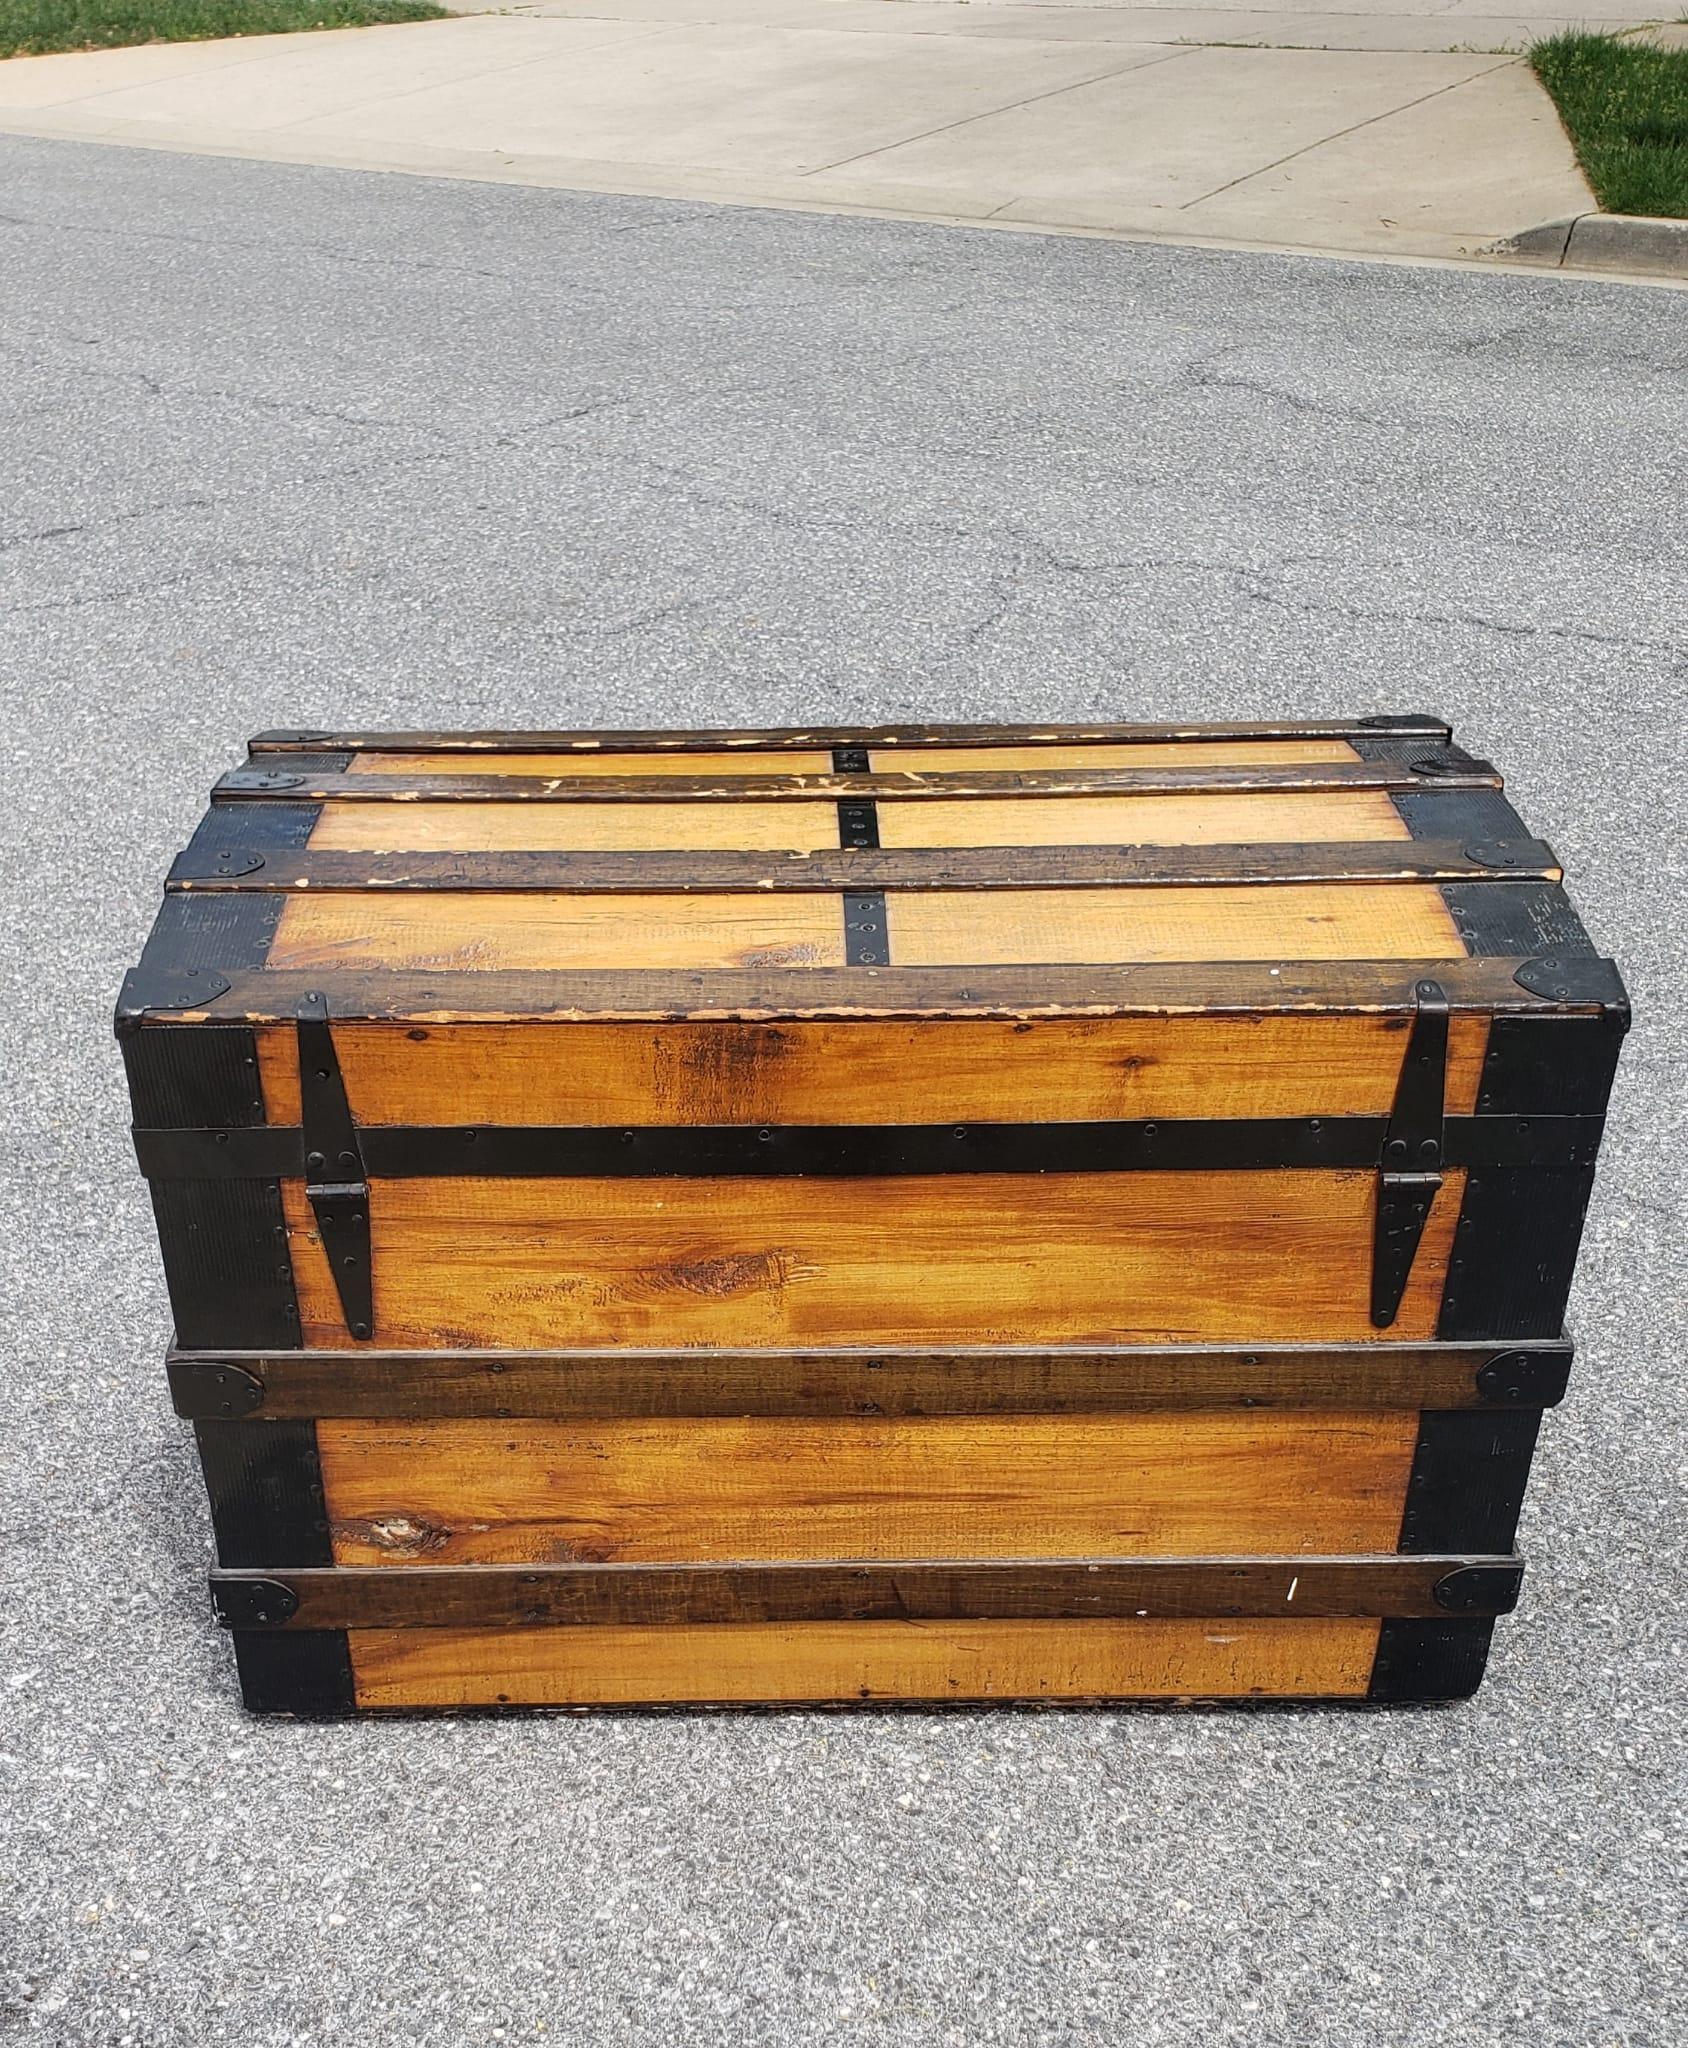 Early 20th Century American Rolling Pine Blanket Chest Storage Trunk For Sale 2